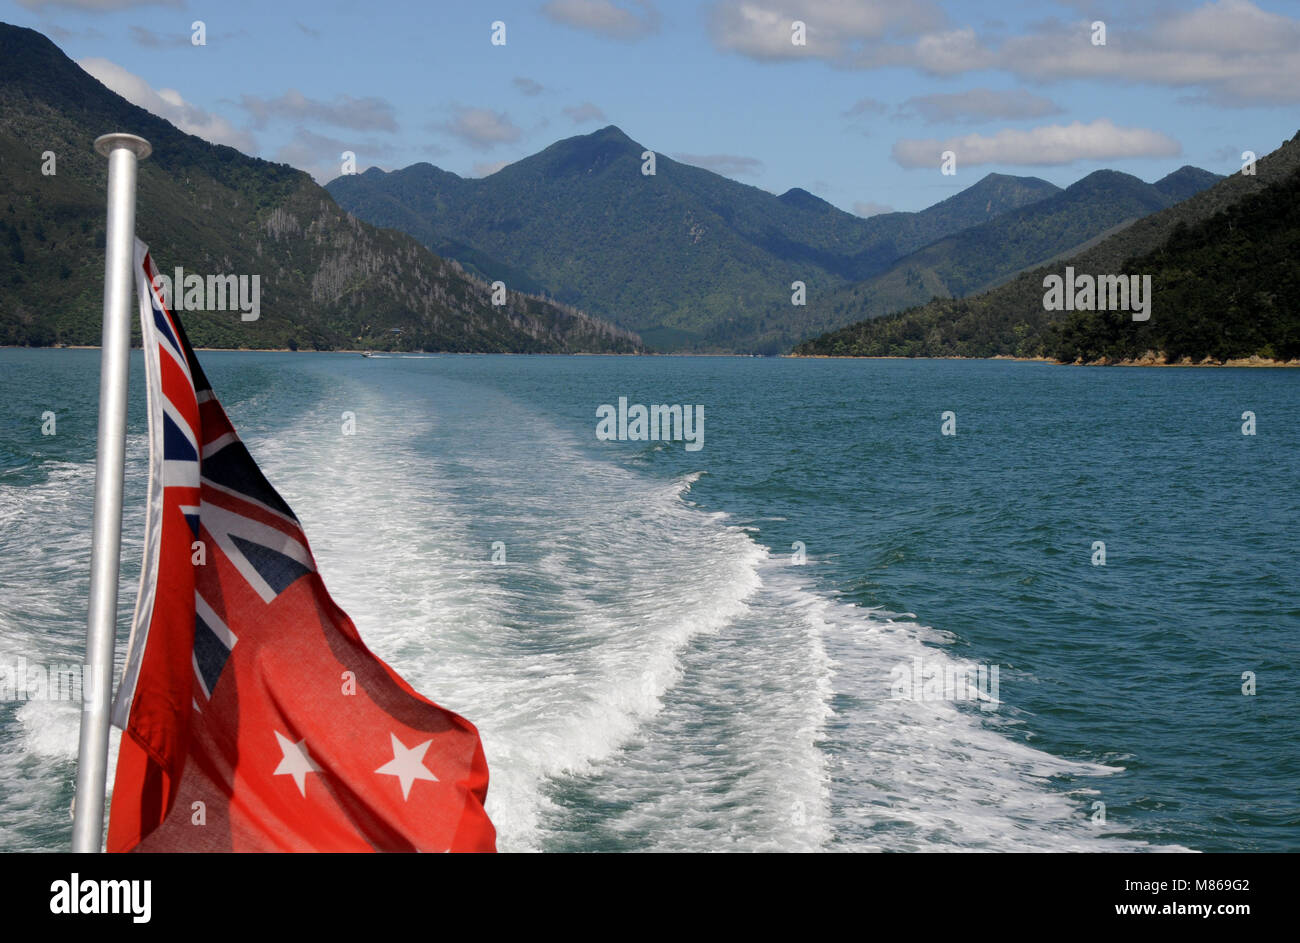 The Pelorus Mailboat, oficially part of the NewZealand Post mail run, takes mail, supplies and passengers to remote parts of the Marlborough Sound. Stock Photo